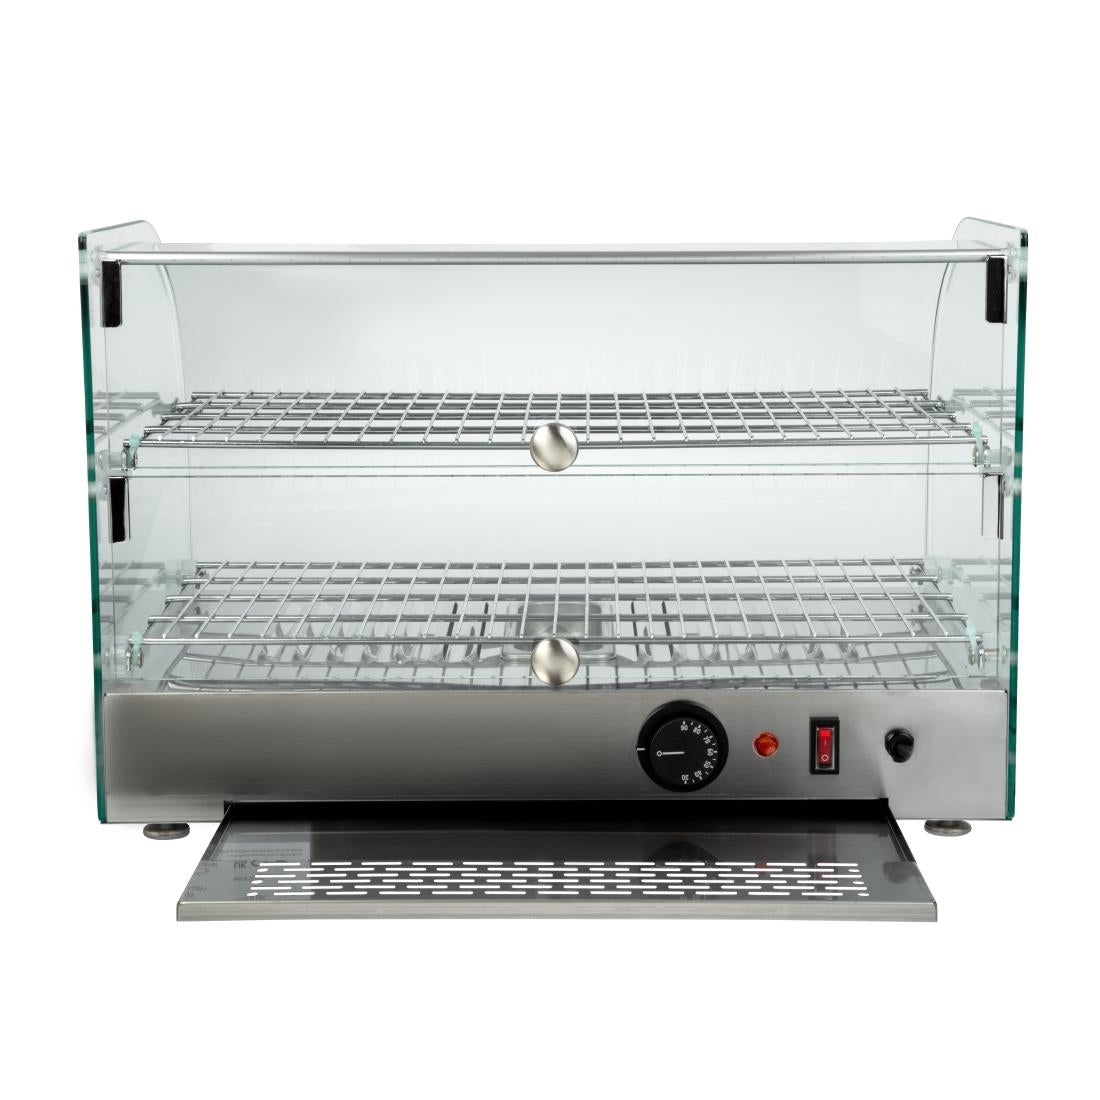 Buffalo Countertop Heated Food Display 554mm JD Catering Equipment Solutions Ltd